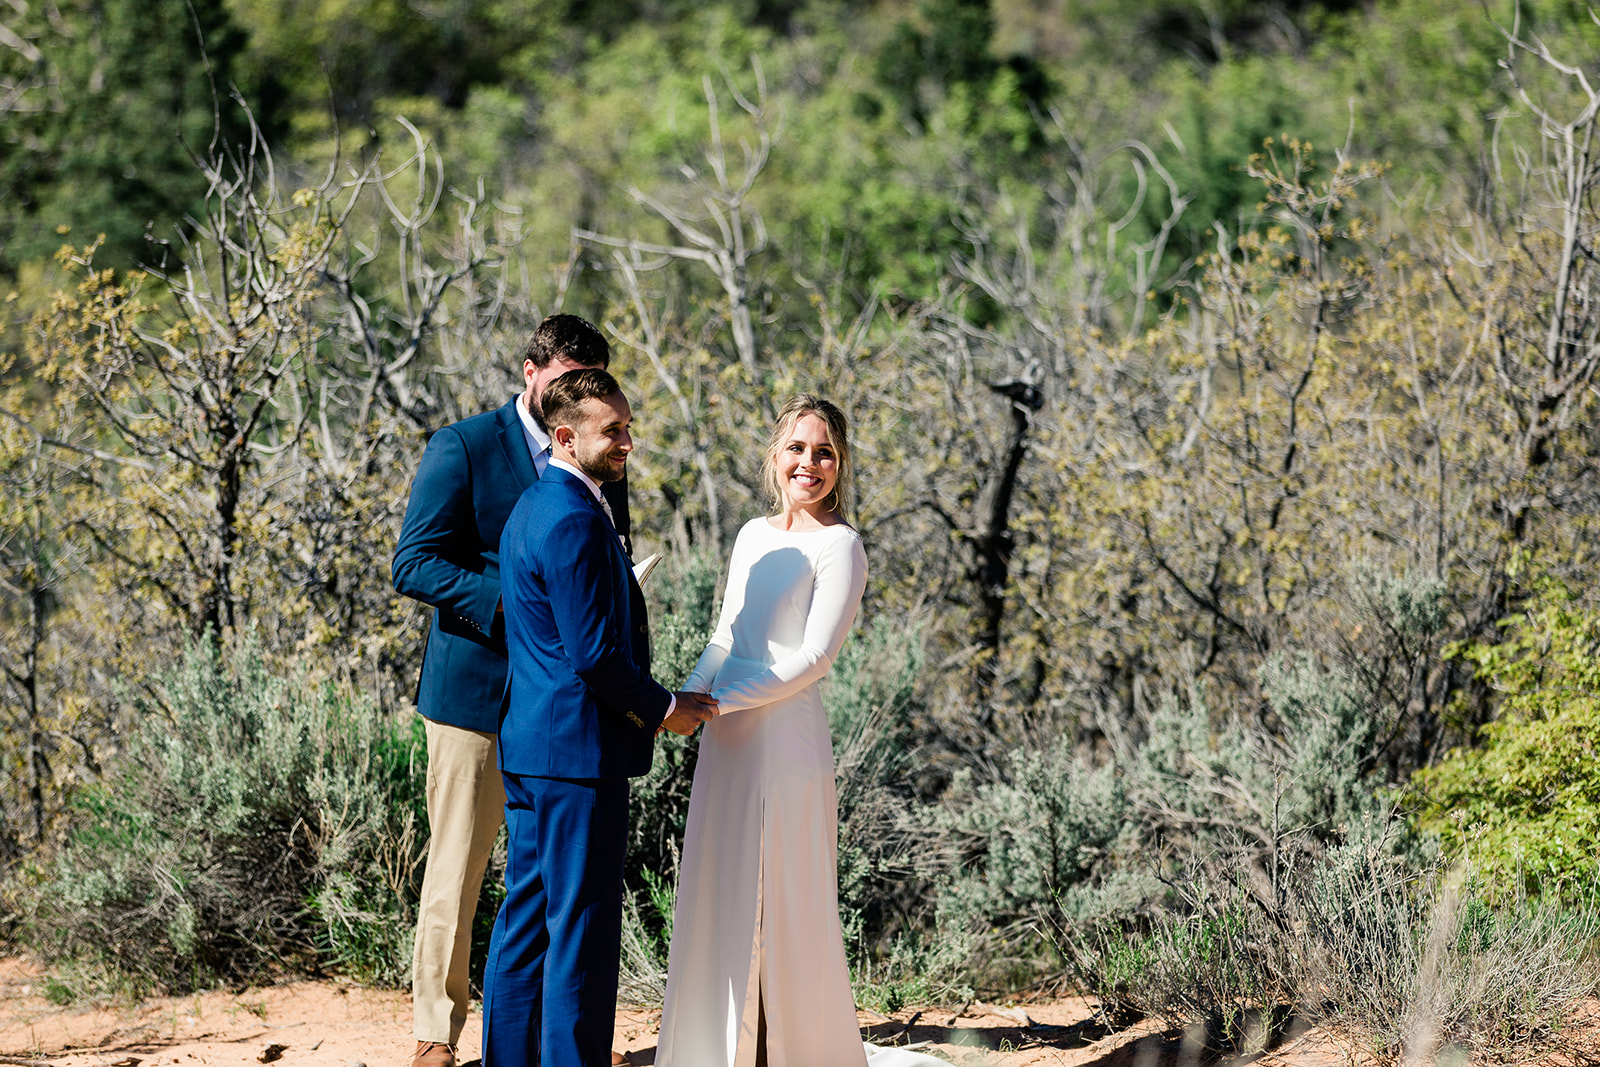 Nick and Kate's elopement ceremony in Zion National Park